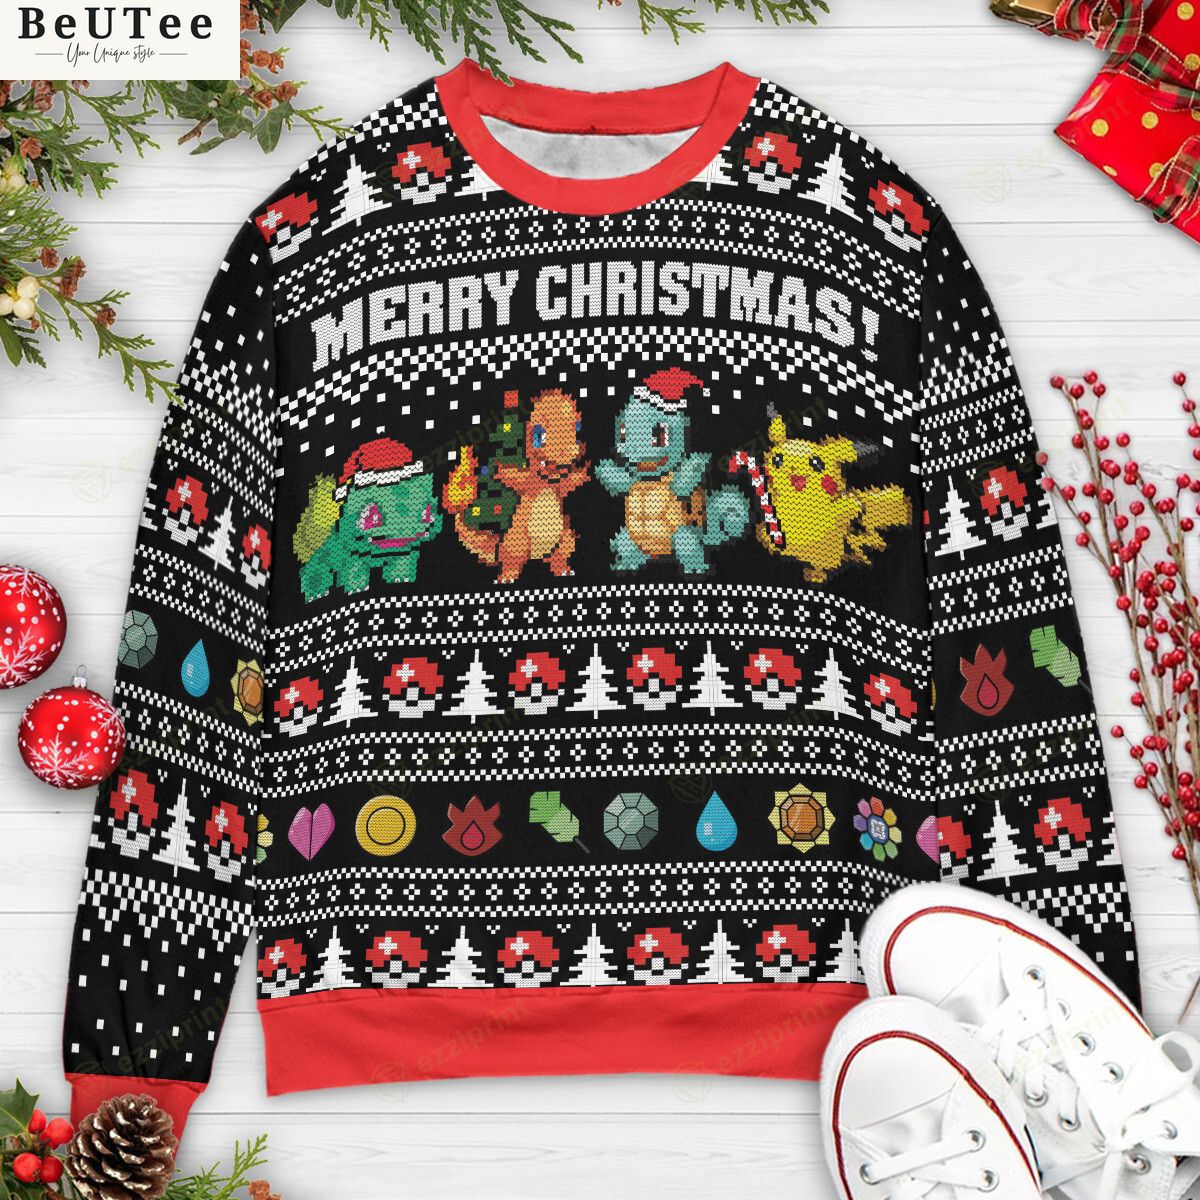 Kanto Starters Pokemon Christmas Sweater Have no words to explain your beauty